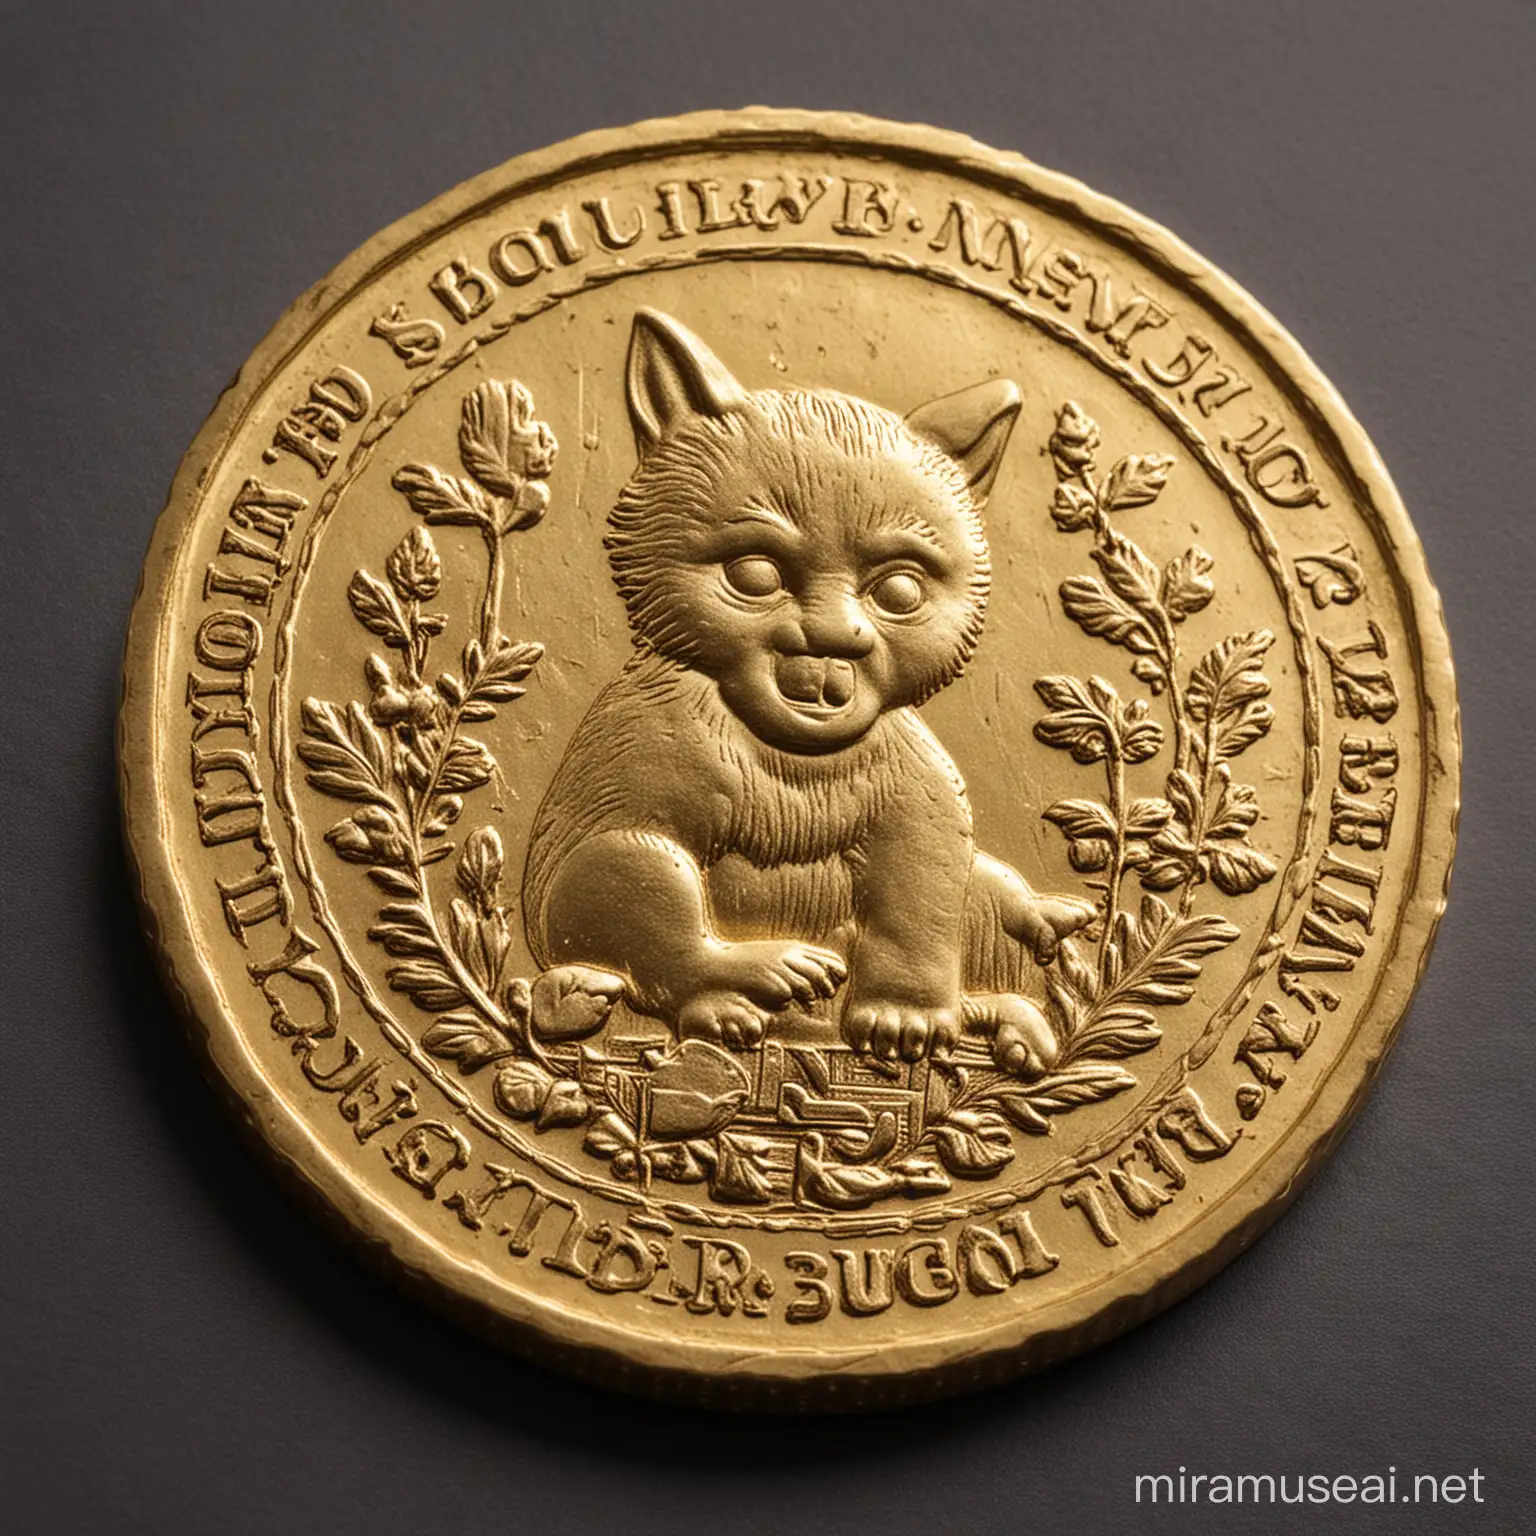 Gold Coin Depicting Bad Luck Sinister Symbol of Misfortune